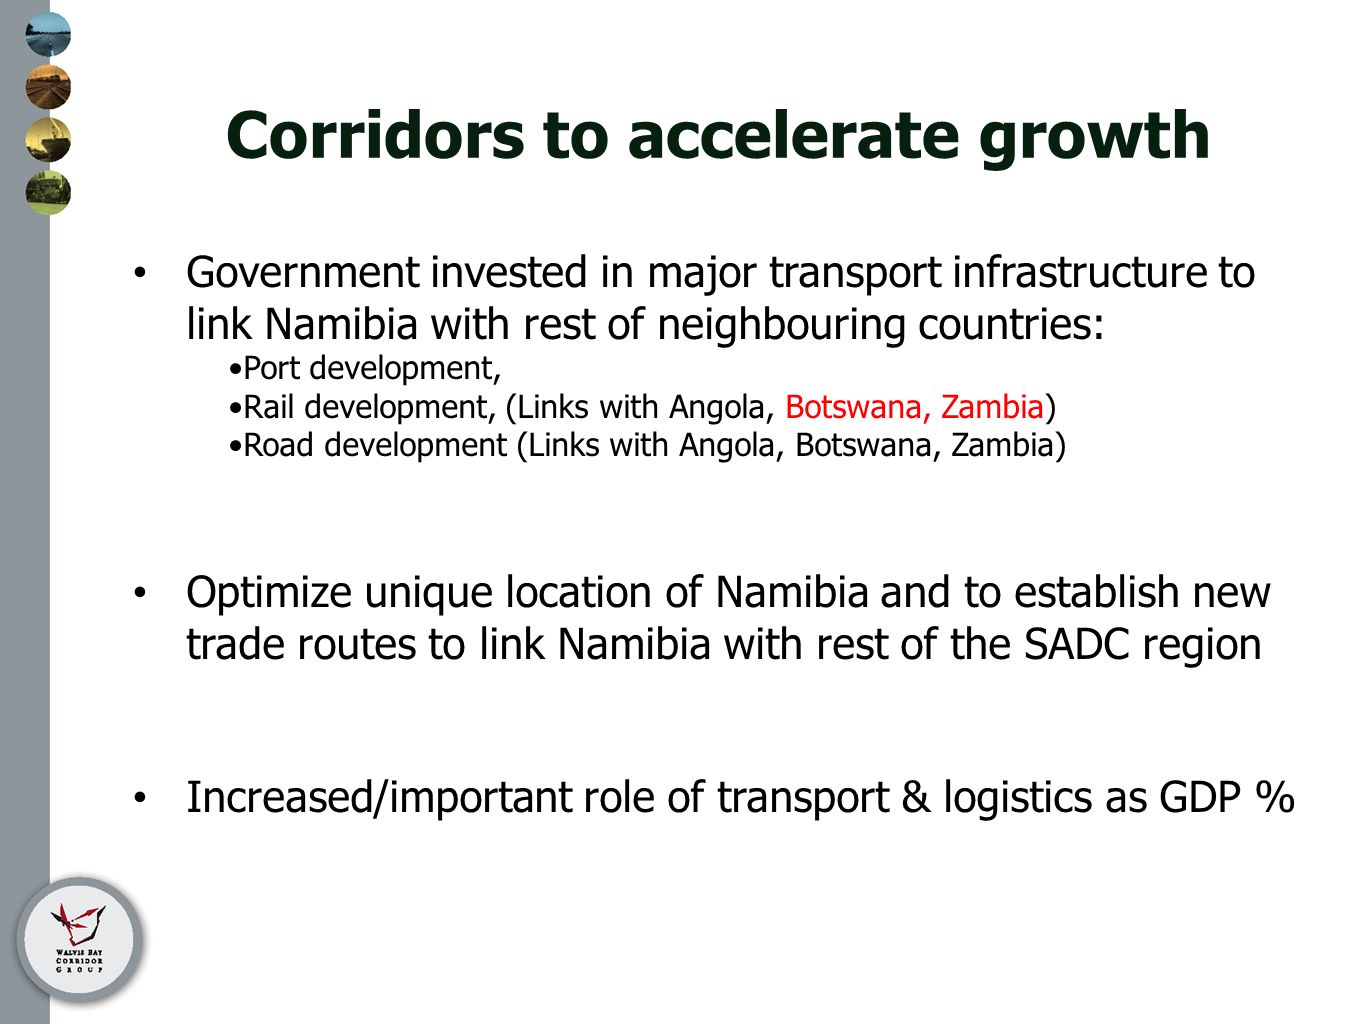 Corridors to accelerate growth Government invested in major transport infrastructure to link Namibia with rest of neighbouring countries: Port development, Rail development, (Links with Angola, Botswana, Zambia) Road development (Links with Angola, Botswana, Zambia) Optimize unique location of Namibia and to establish new trade routes to link Namibia with rest of the SADC region Increased/important role of transport & logistics as GDP %